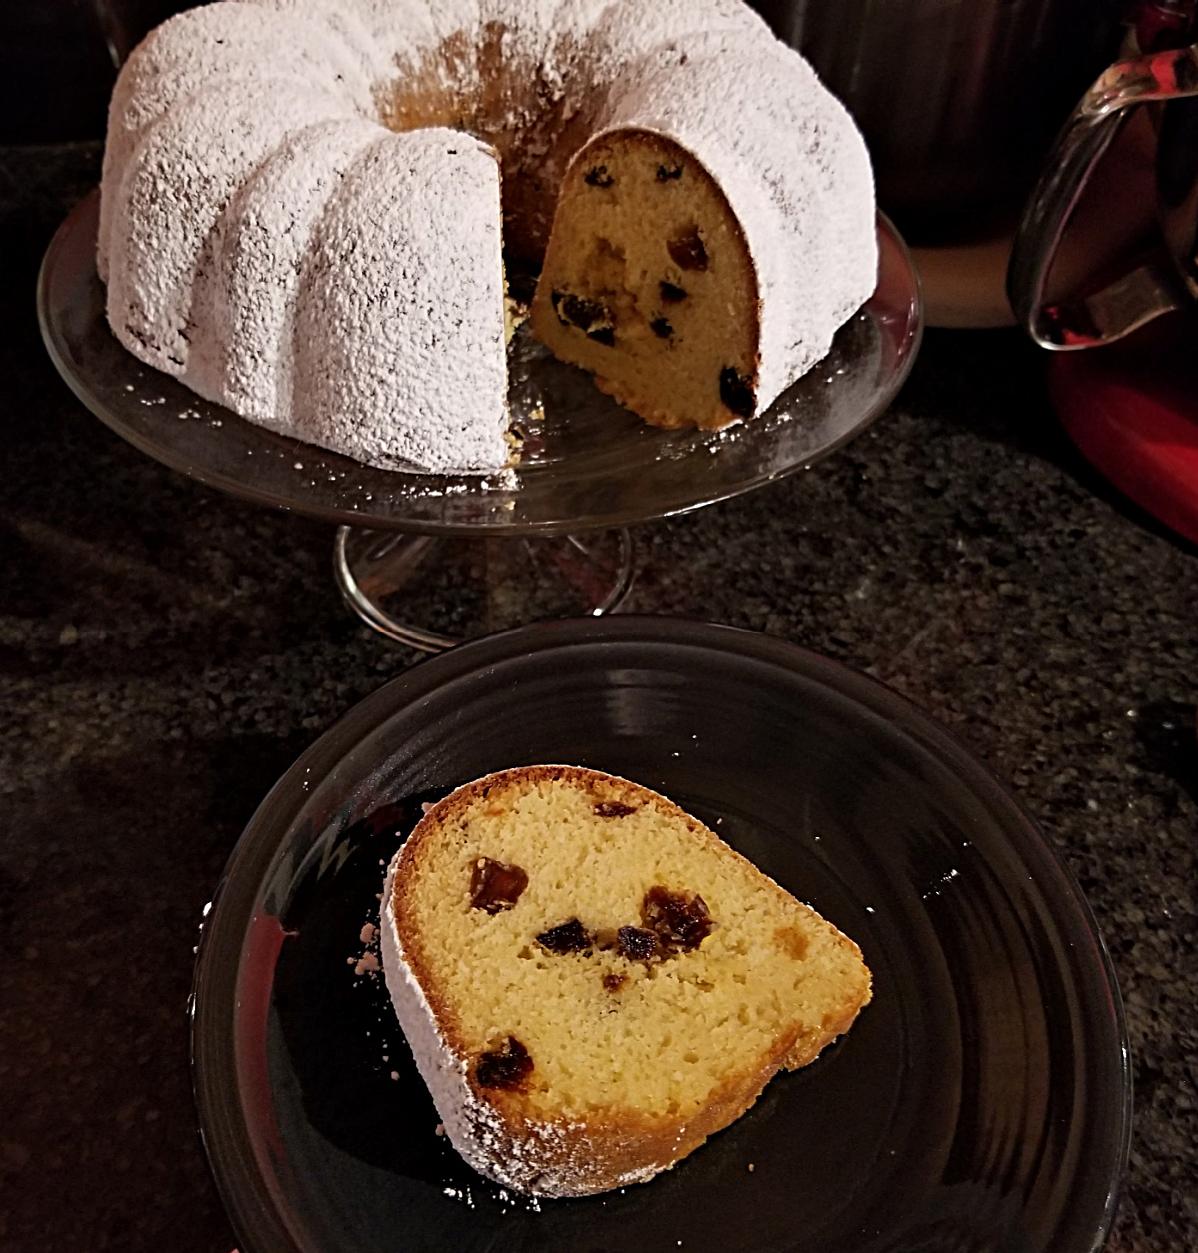  Enjoy this classic coffee cake with a twist!